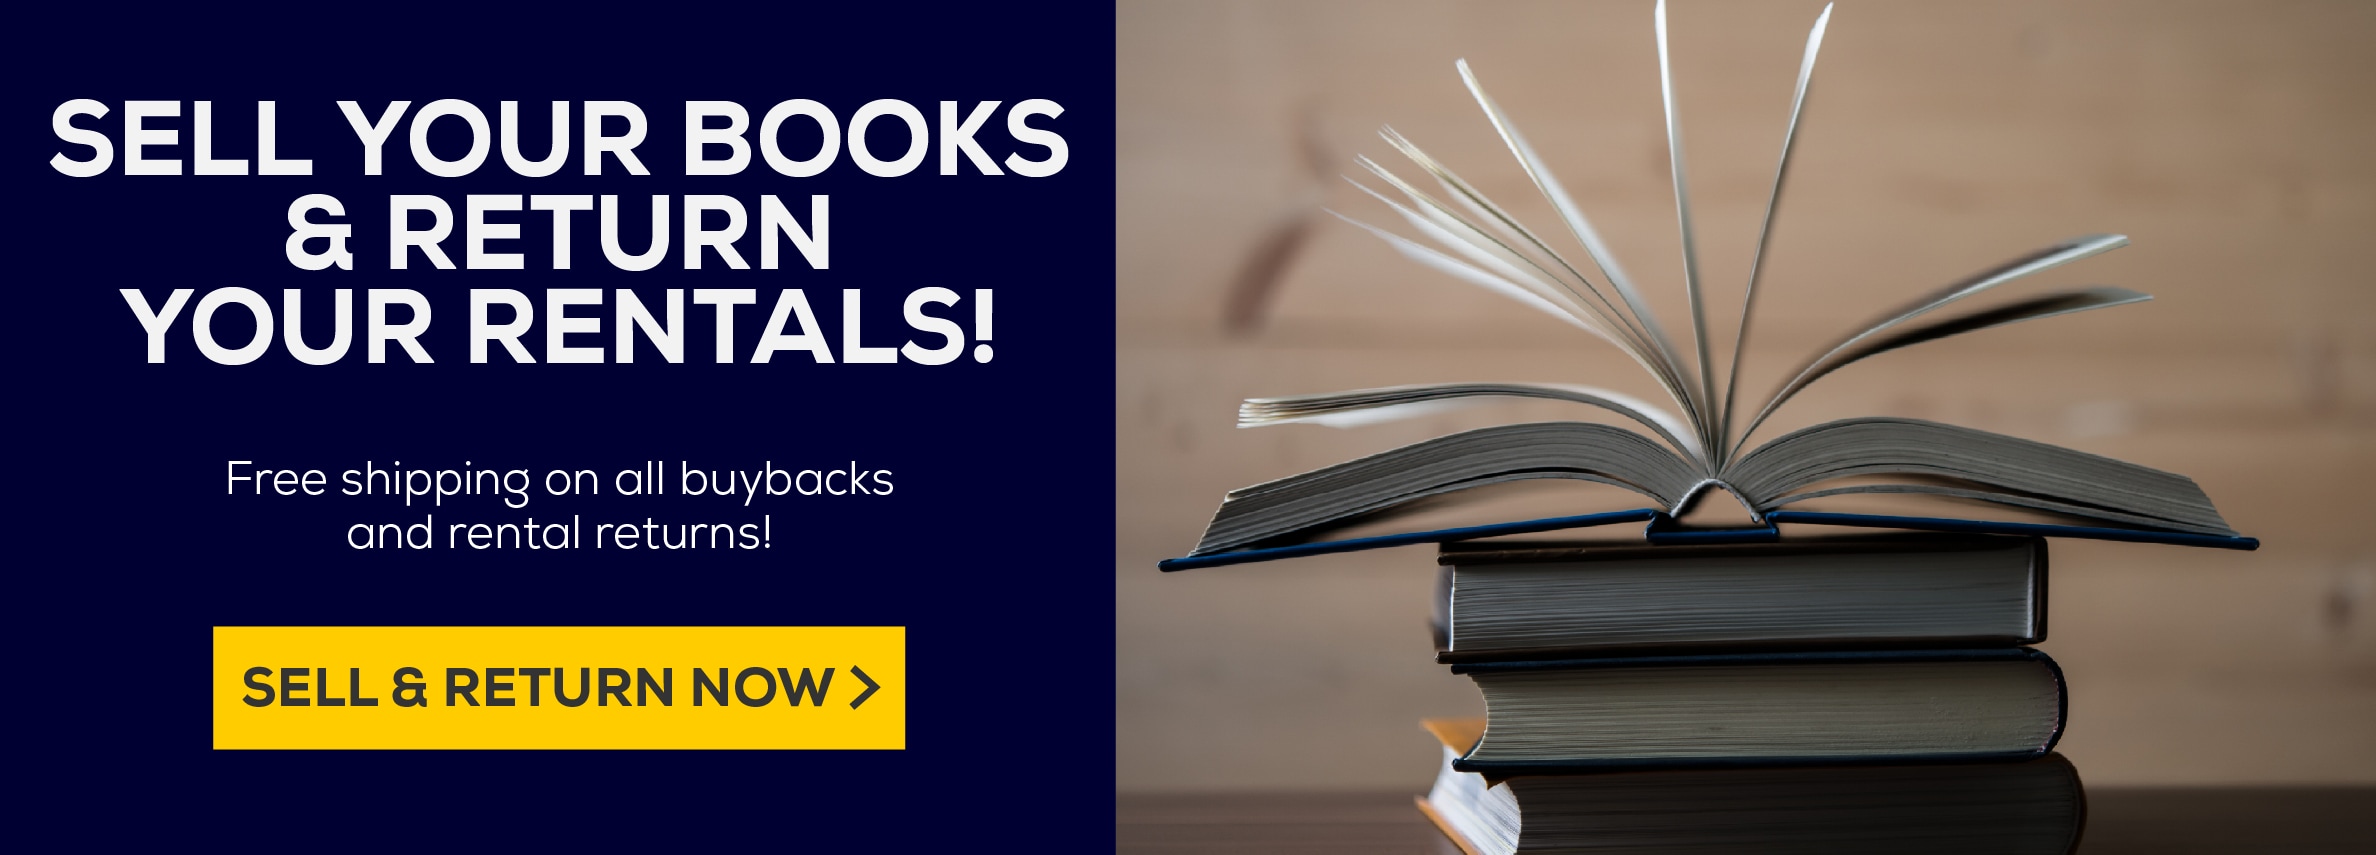 Sell your books and return your rentals. Free shipping on buybacks and rental returns. Sell and return now!